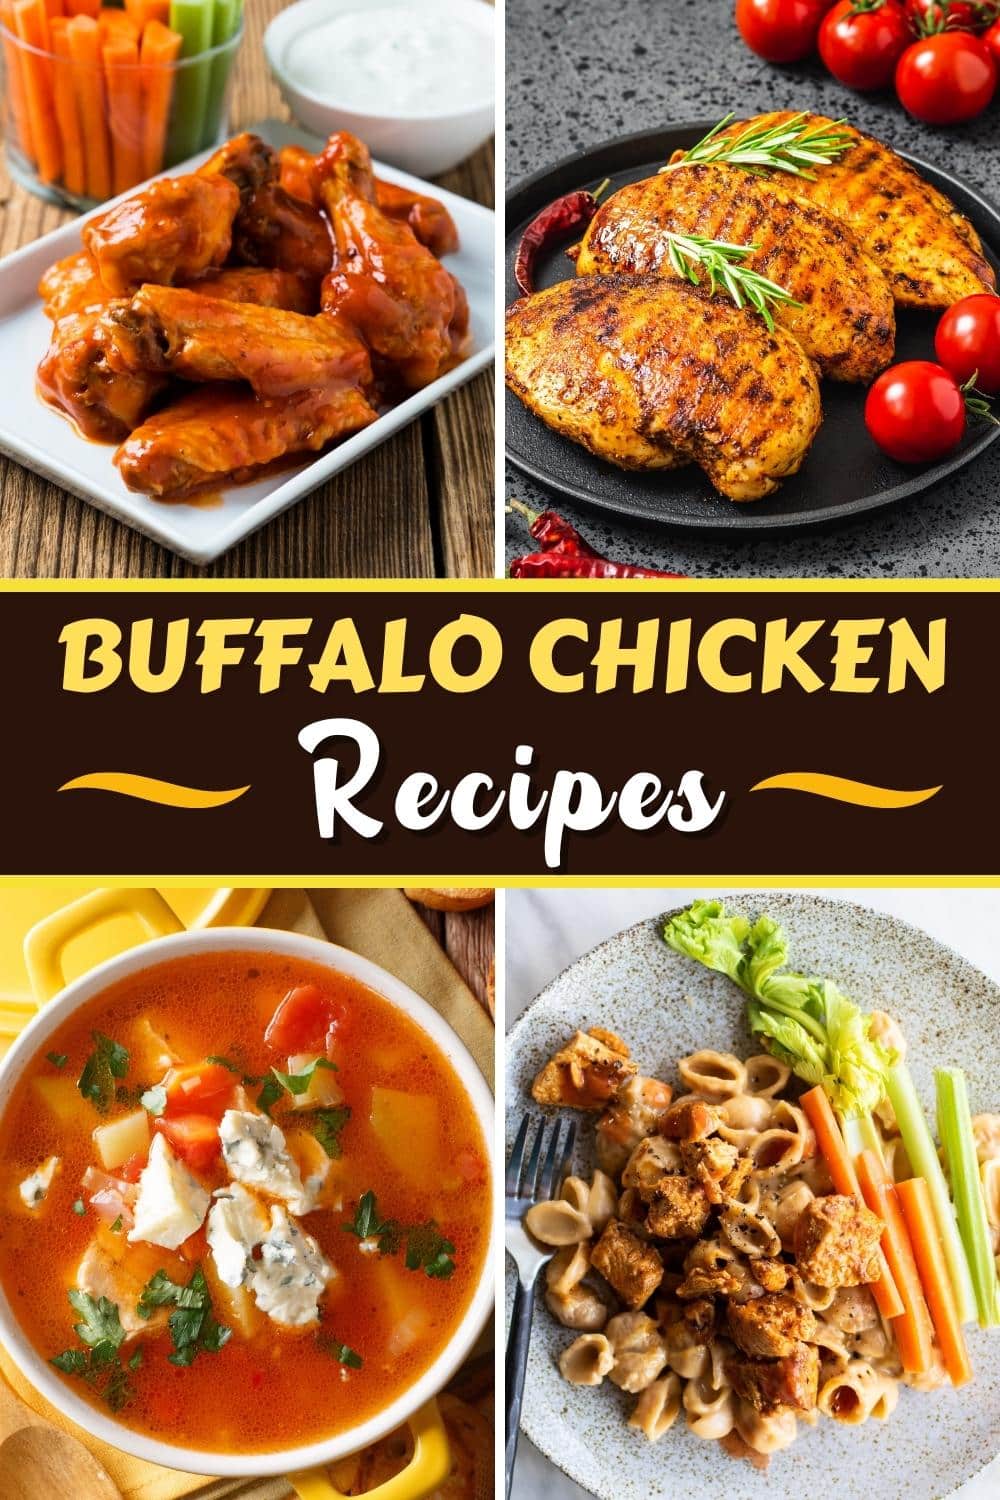 25 Best Buffalo Chicken Recipes You’ll Love - Insanely Good